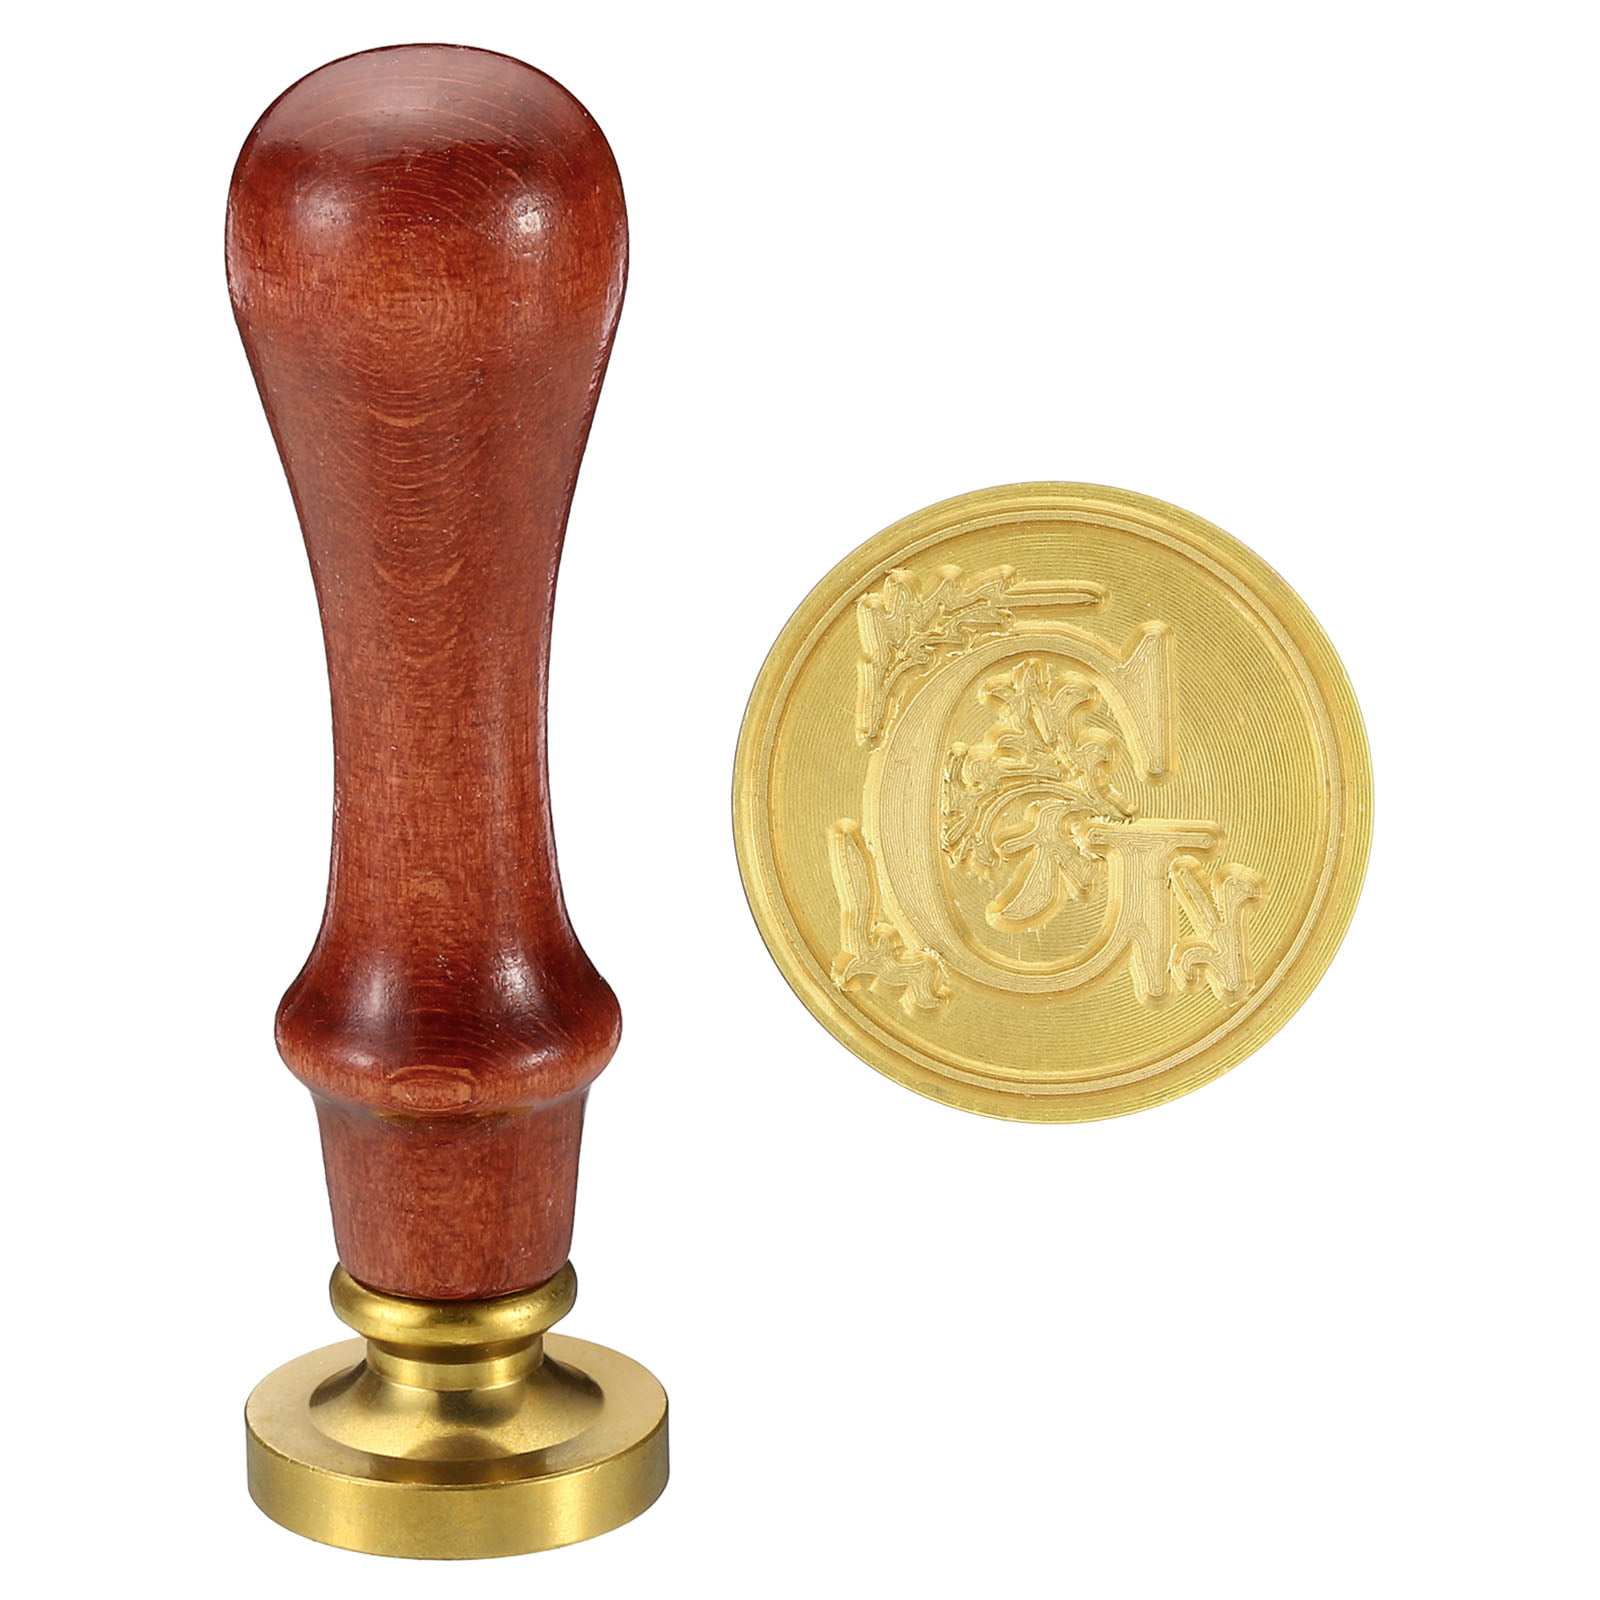 Initial Wax Seal Gift Set Kit with Scroll font-Brown Wood Handle & Gol –  Nostalgic Impressions